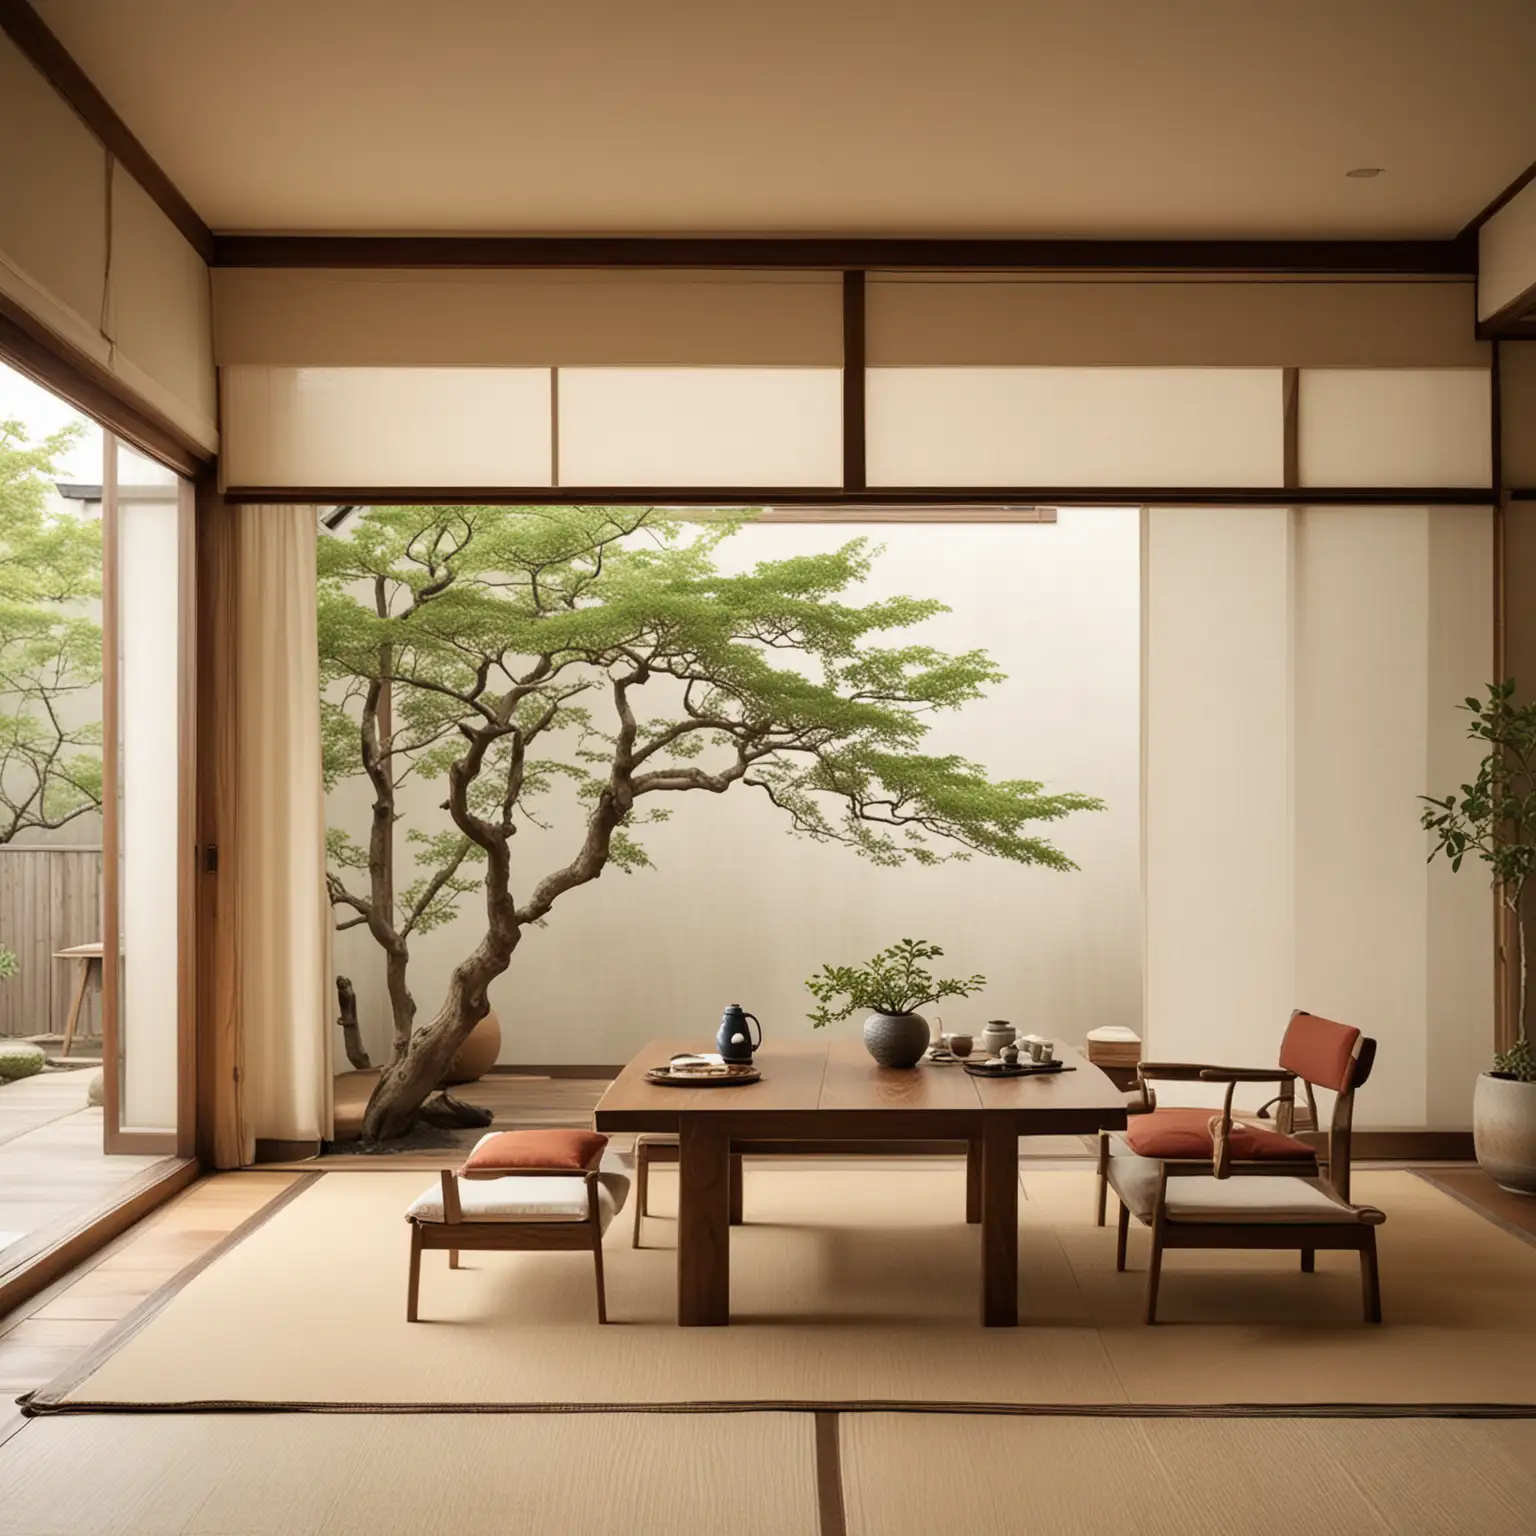 design  a very wide distant shot of Minimalist Japanese-Inspired Dining Area:

Low wooden table with a simple, sleek design.
Floor cushions in neutral tones.
Shoji screens for room dividers.
Bonsai tree as a centerpiece on the table.
Tatami mat flooring and minimal wall decor.
Soft natural light filtering through rice paper windows.